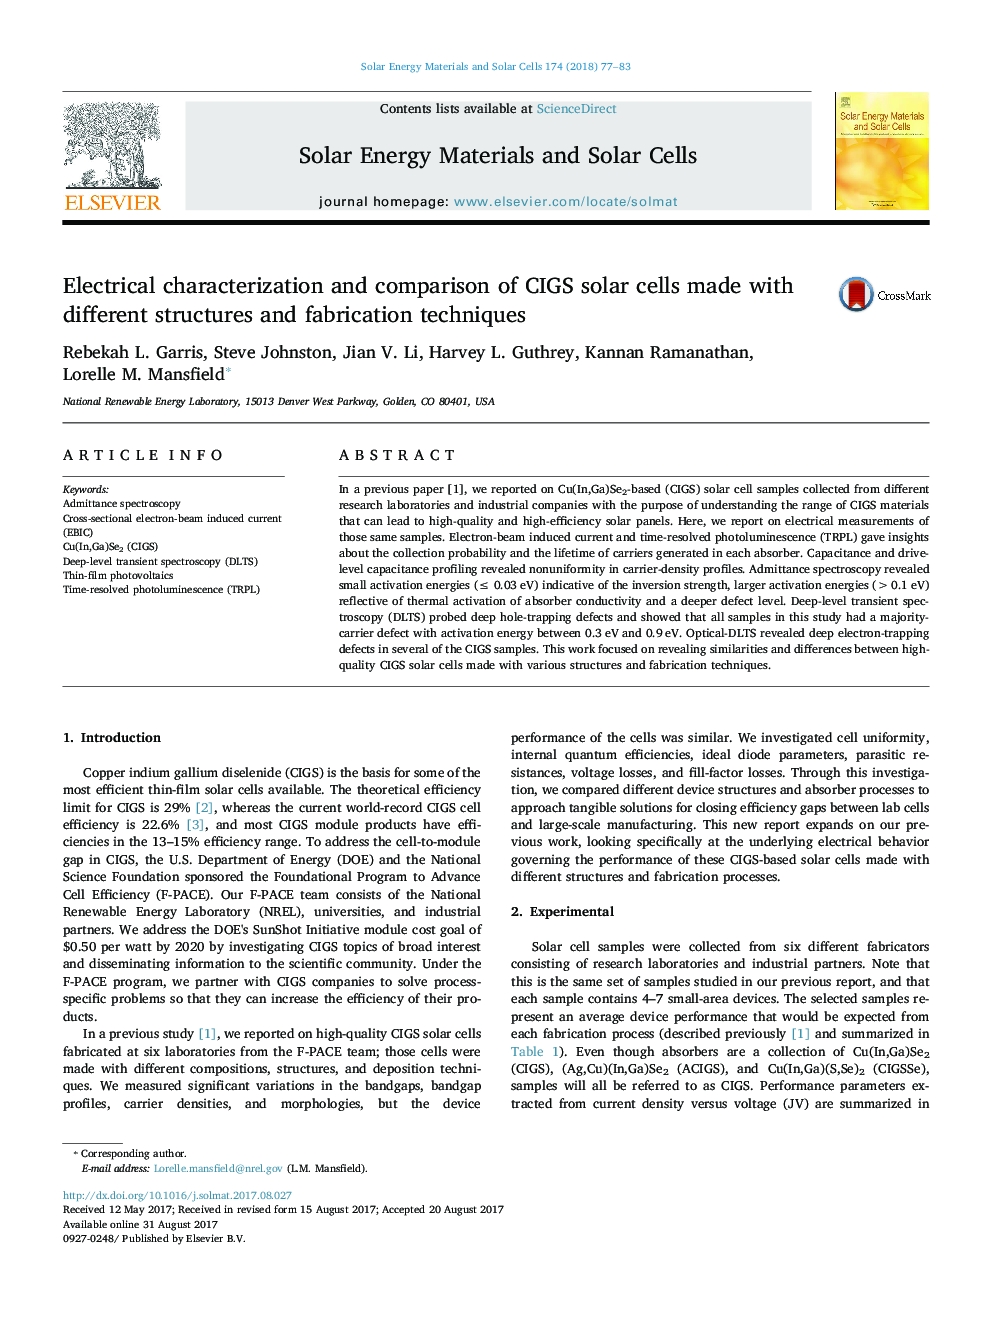 Electrical characterization and comparison of CIGS solar cells made with different structures and fabrication techniques